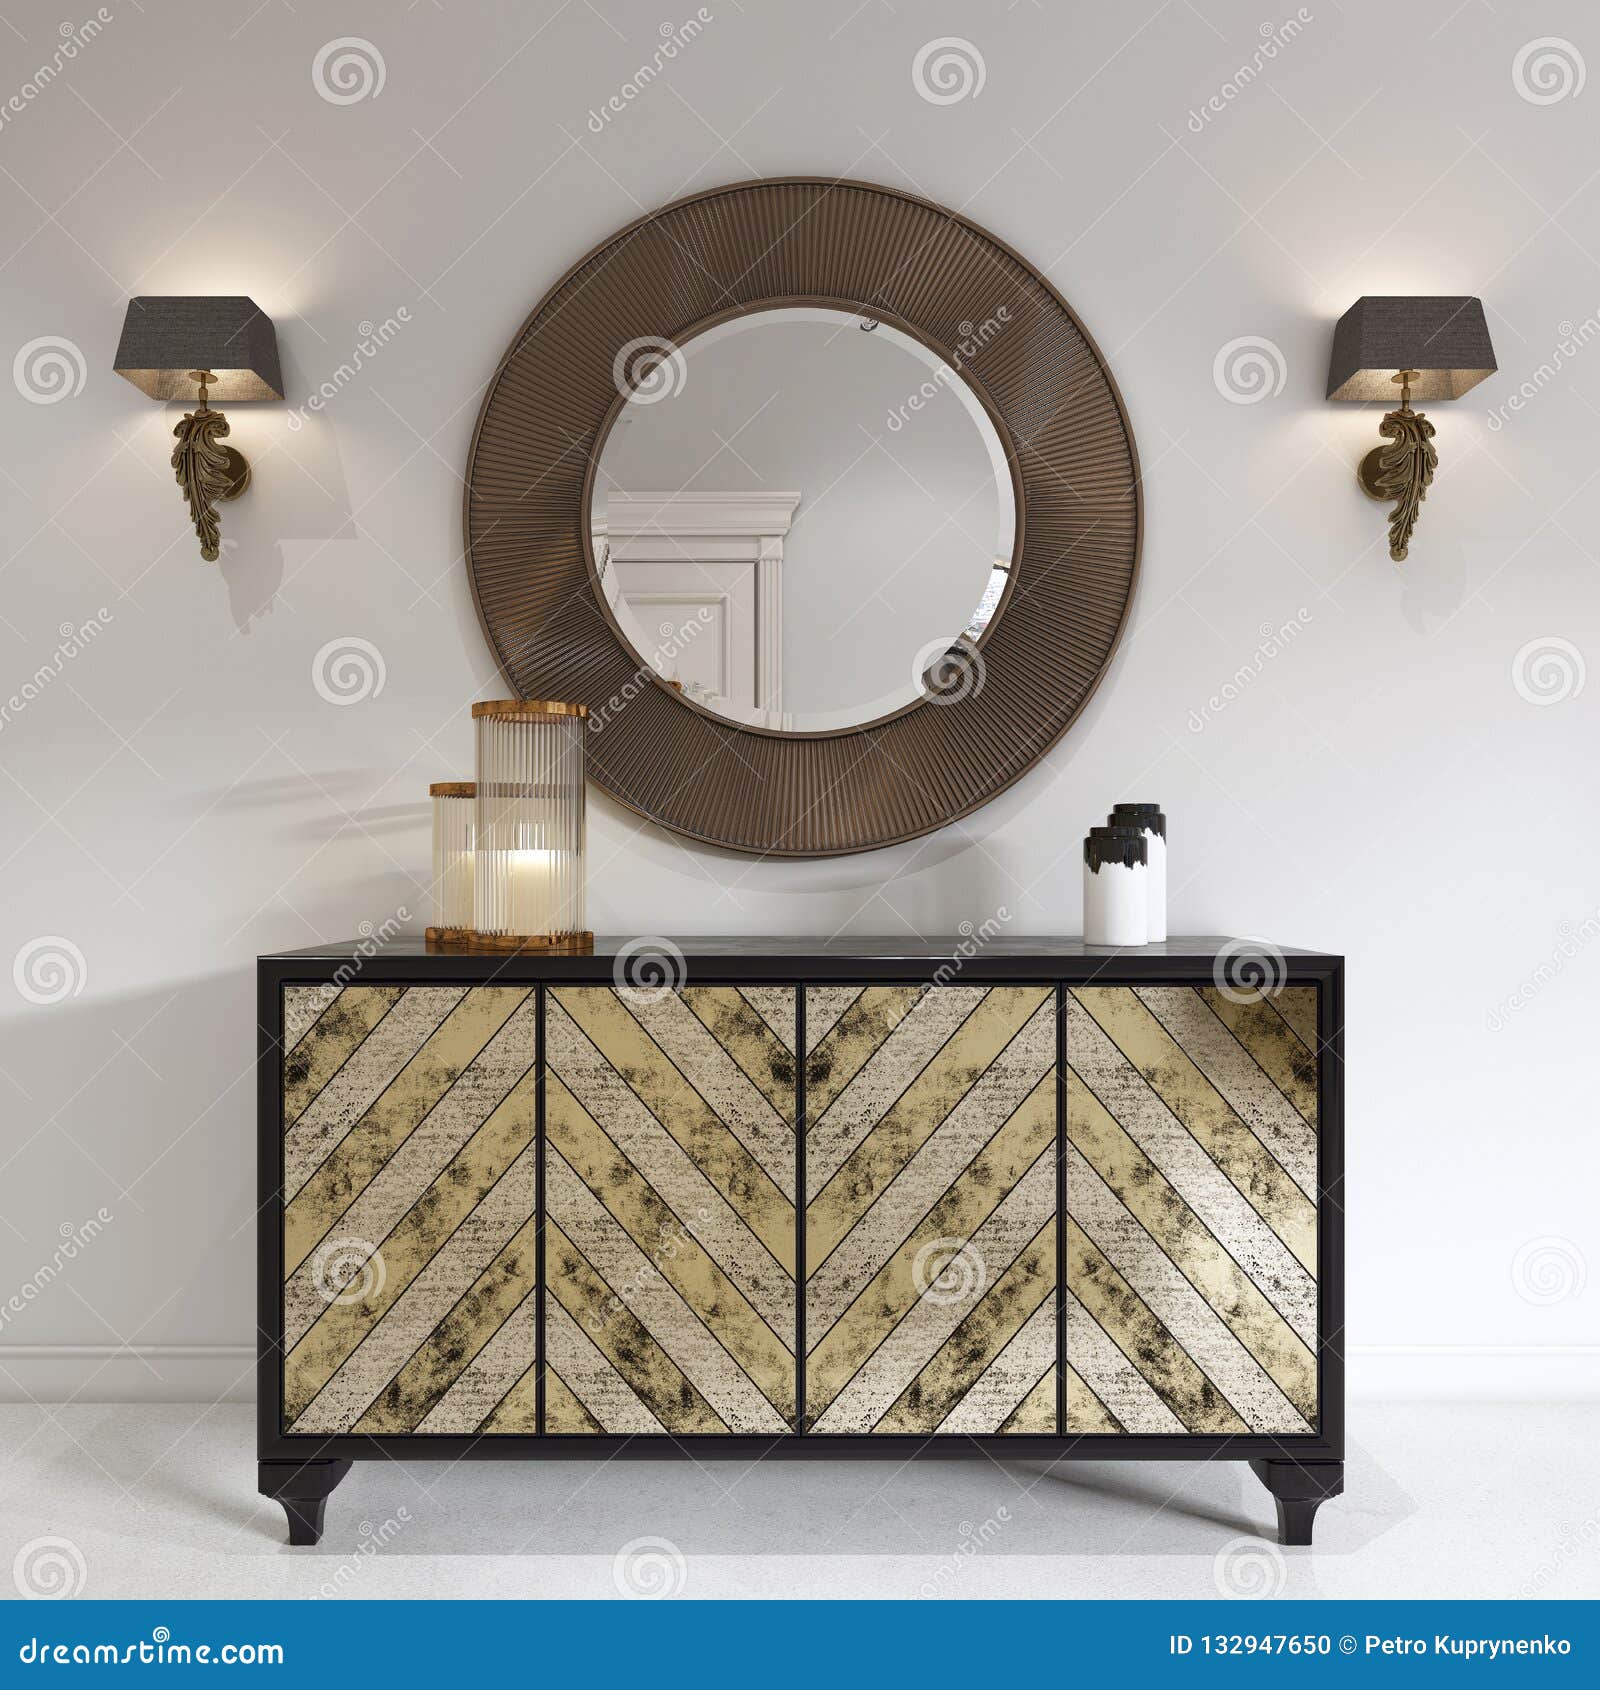 Luxurious Art Deco Style Dresser With Gilded Facade And Patina